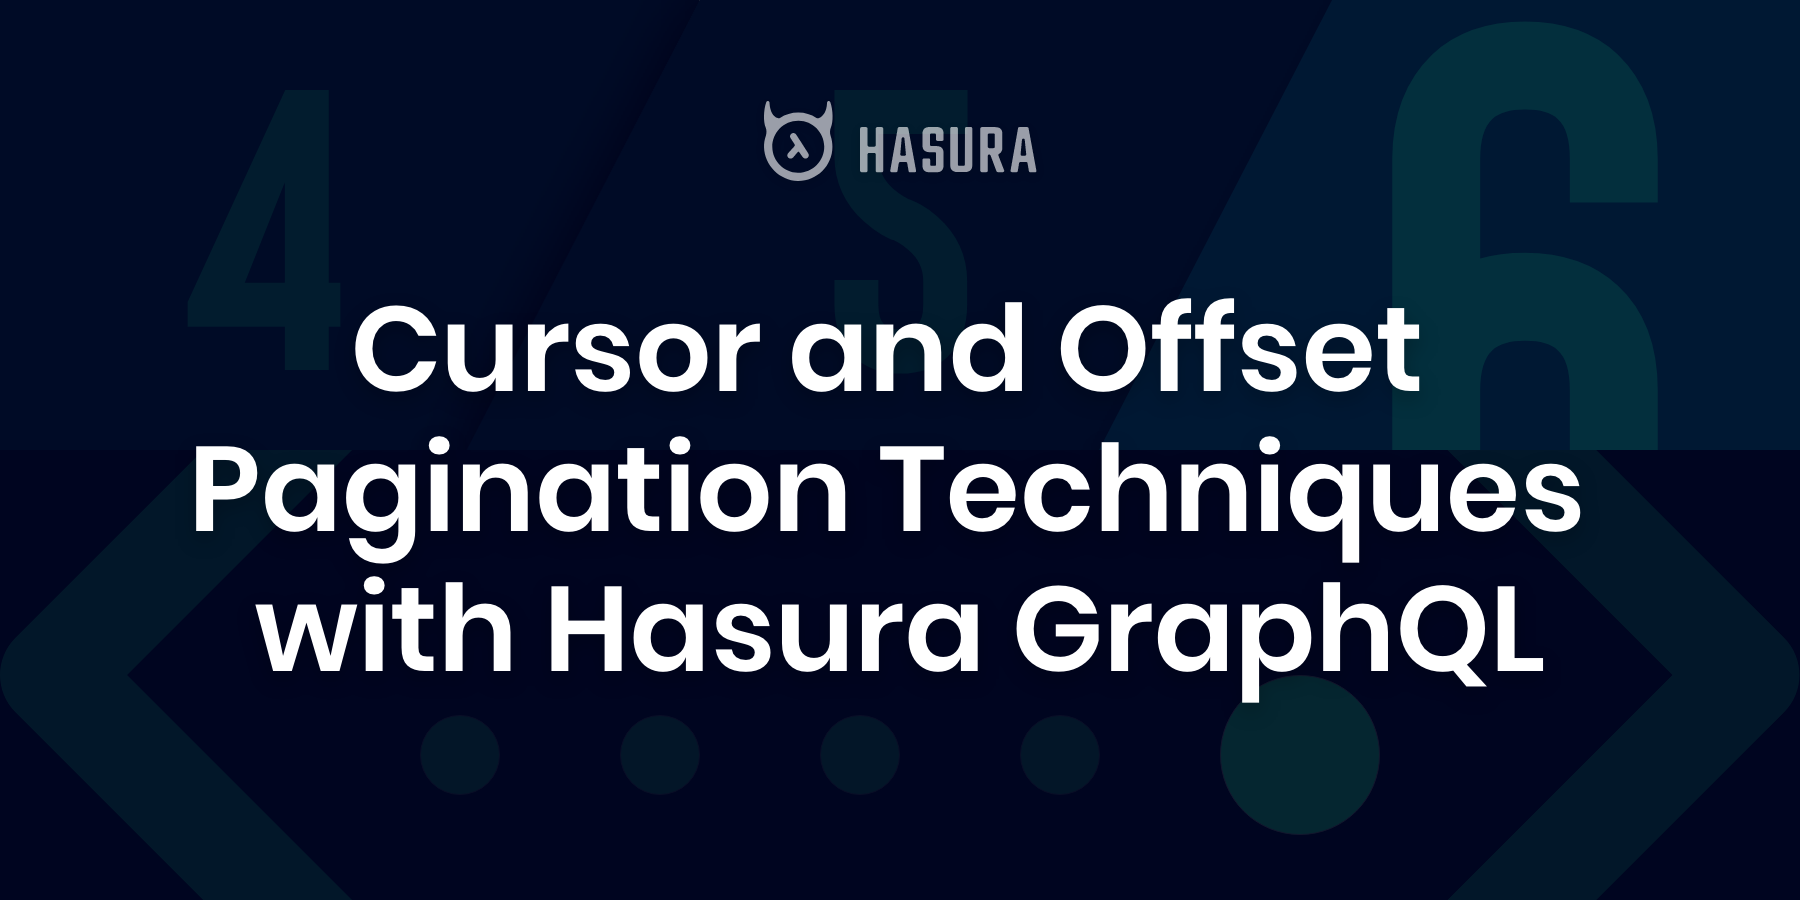 Cursor and Offset Pagination Techniques with Hasura GraphQL